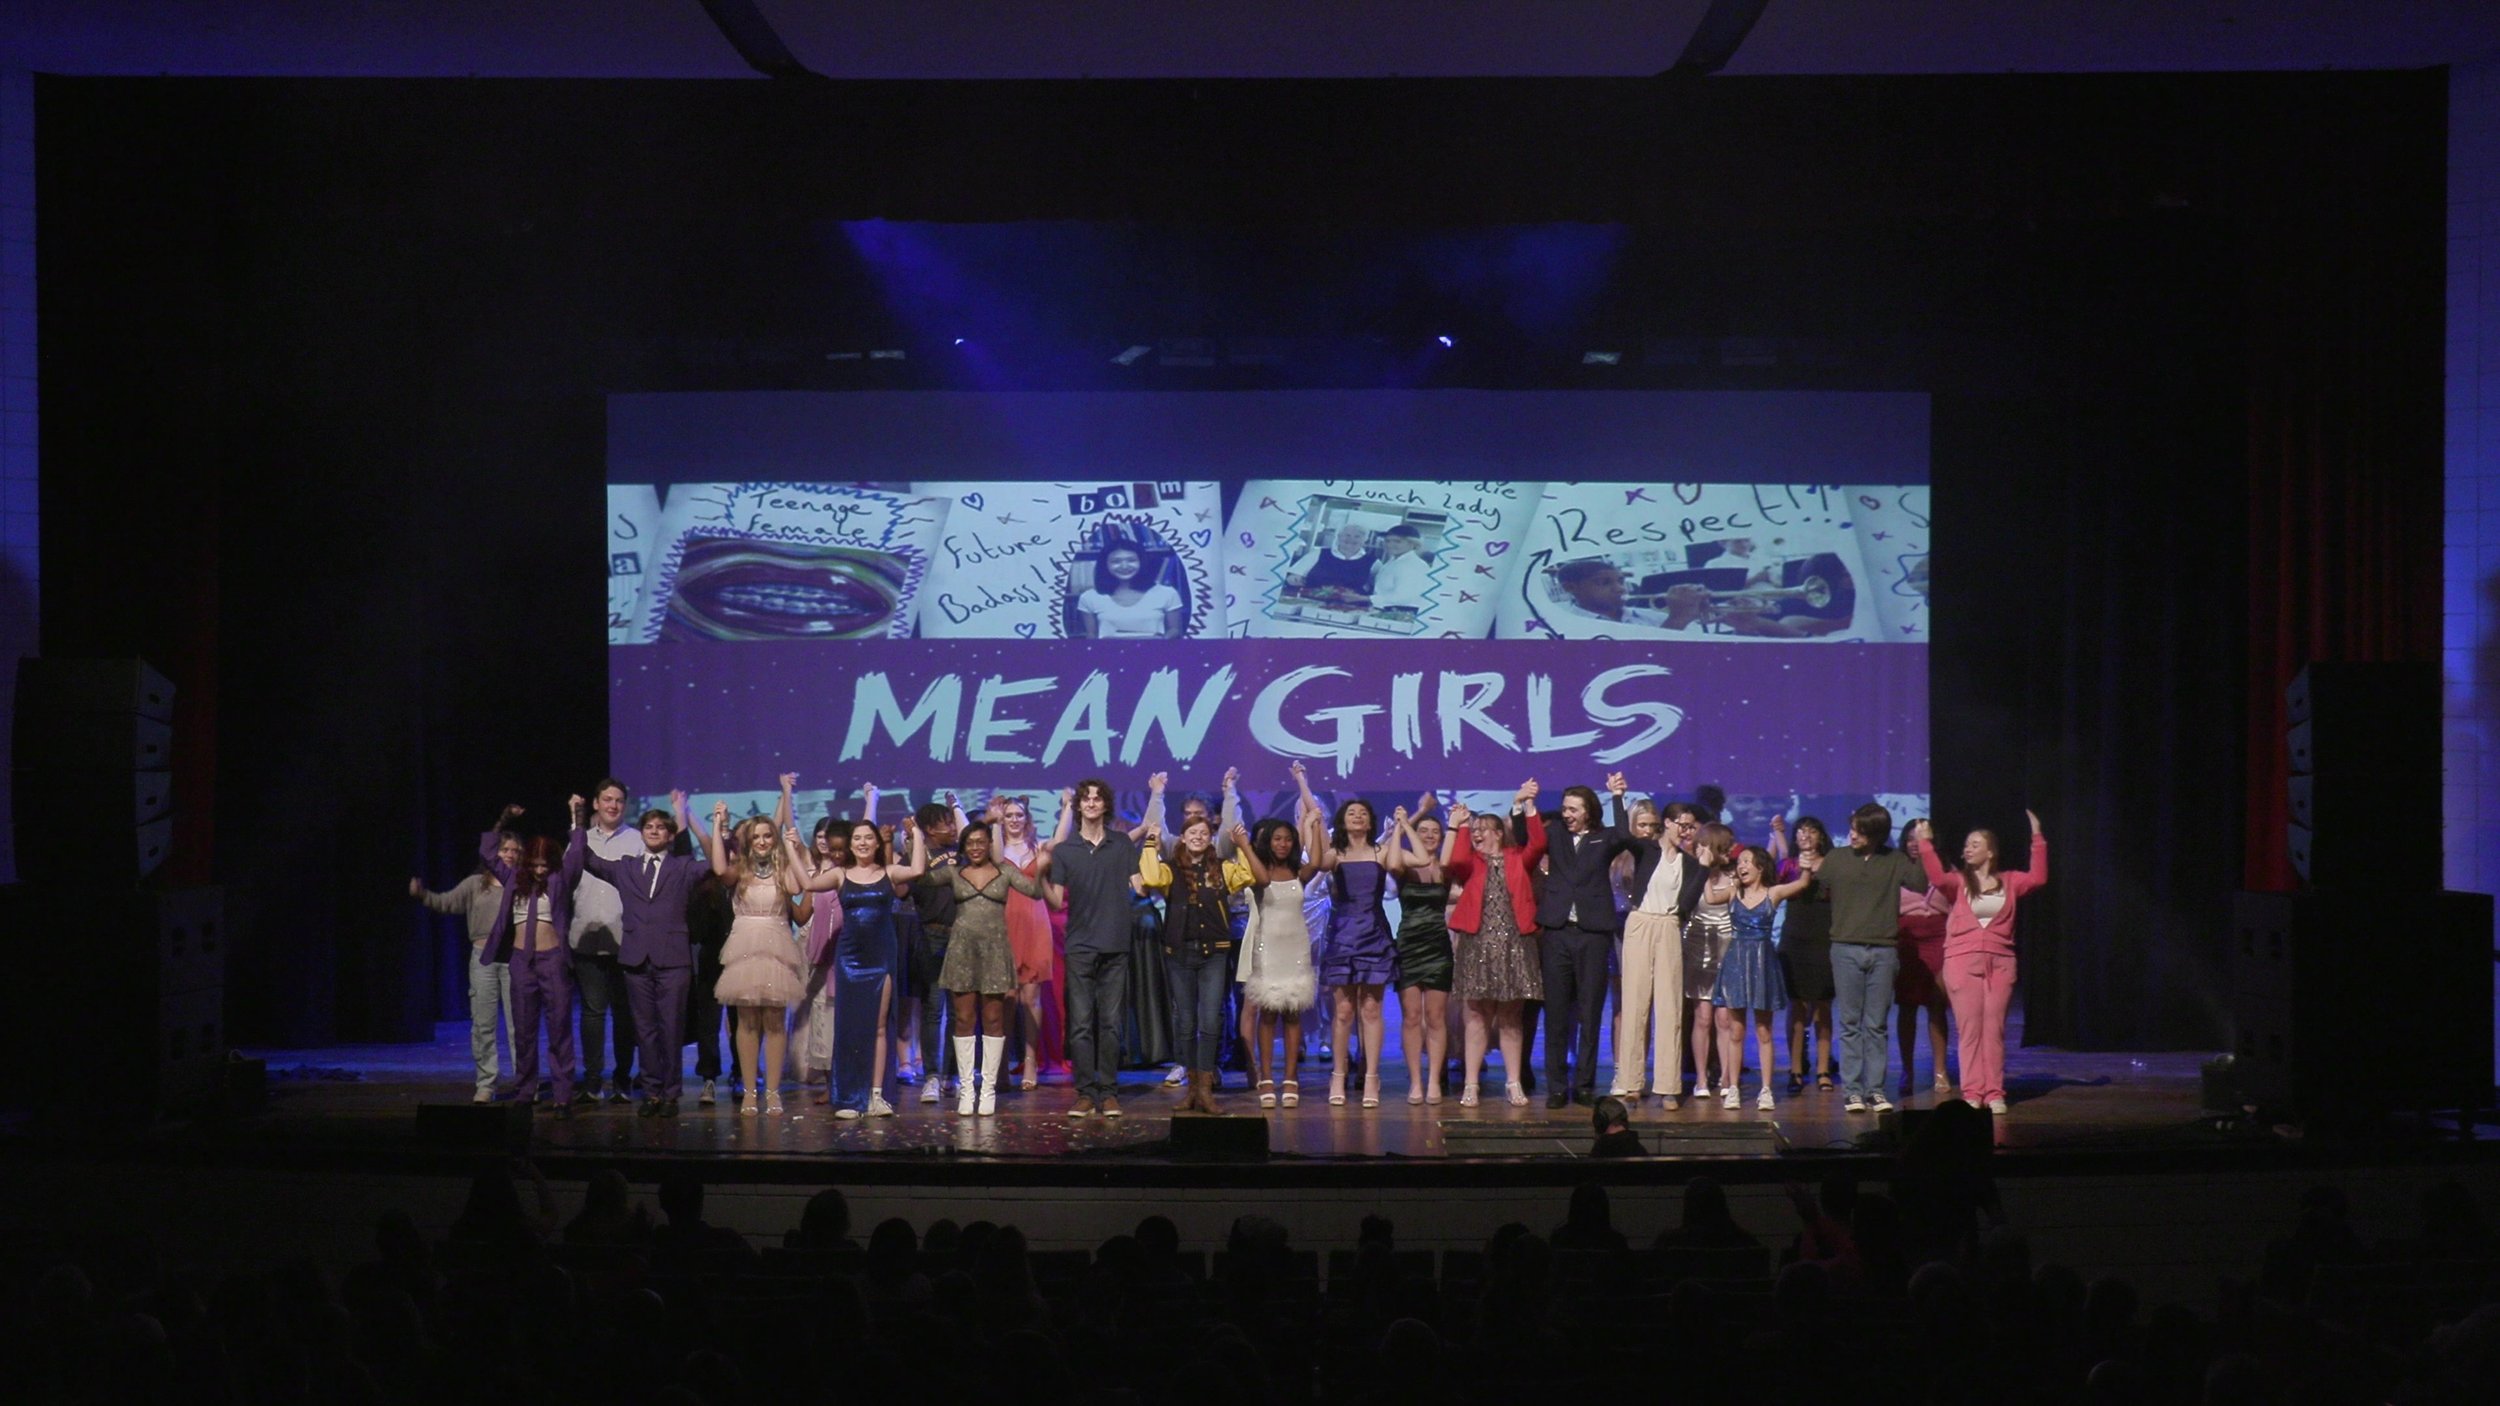 Mean Girls : Lights and projections